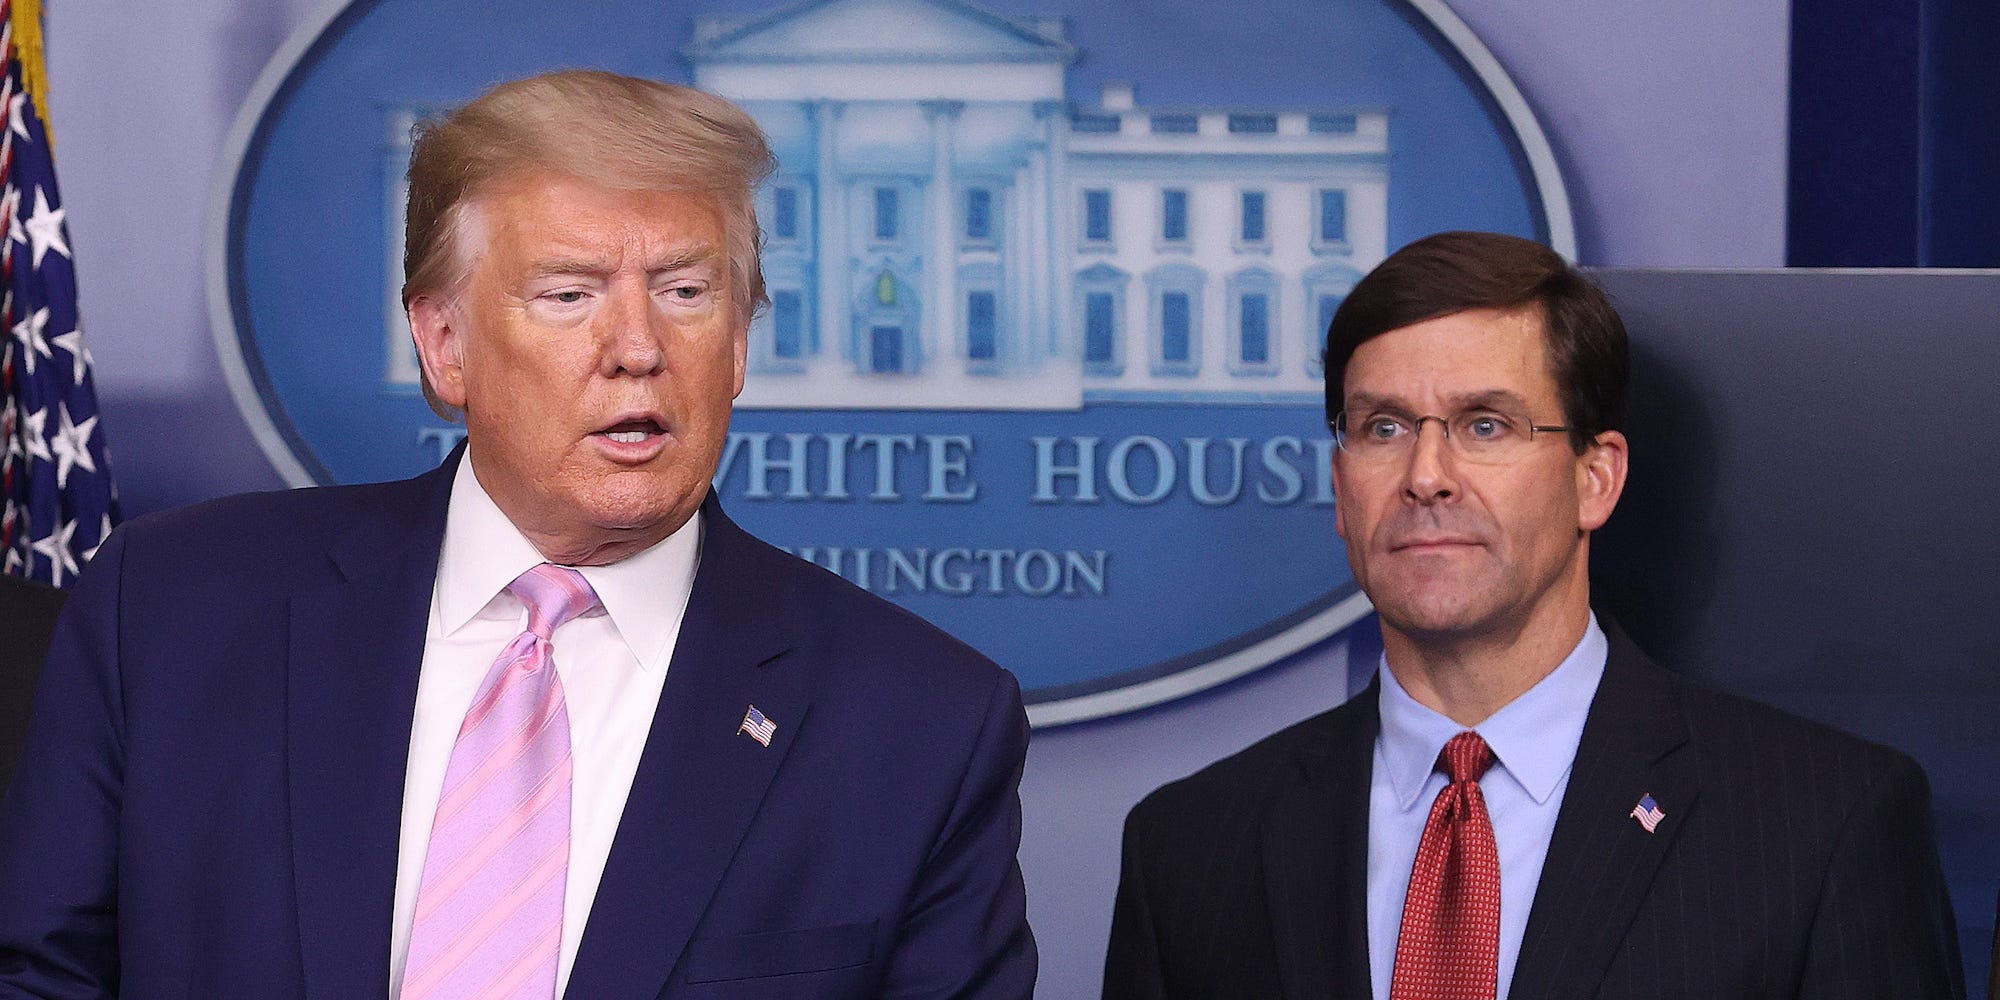 Former President Donald Trump speaks at the press briefing room as former Defense Secretary Mark Esper looks on at the White House on April 1, 2020.